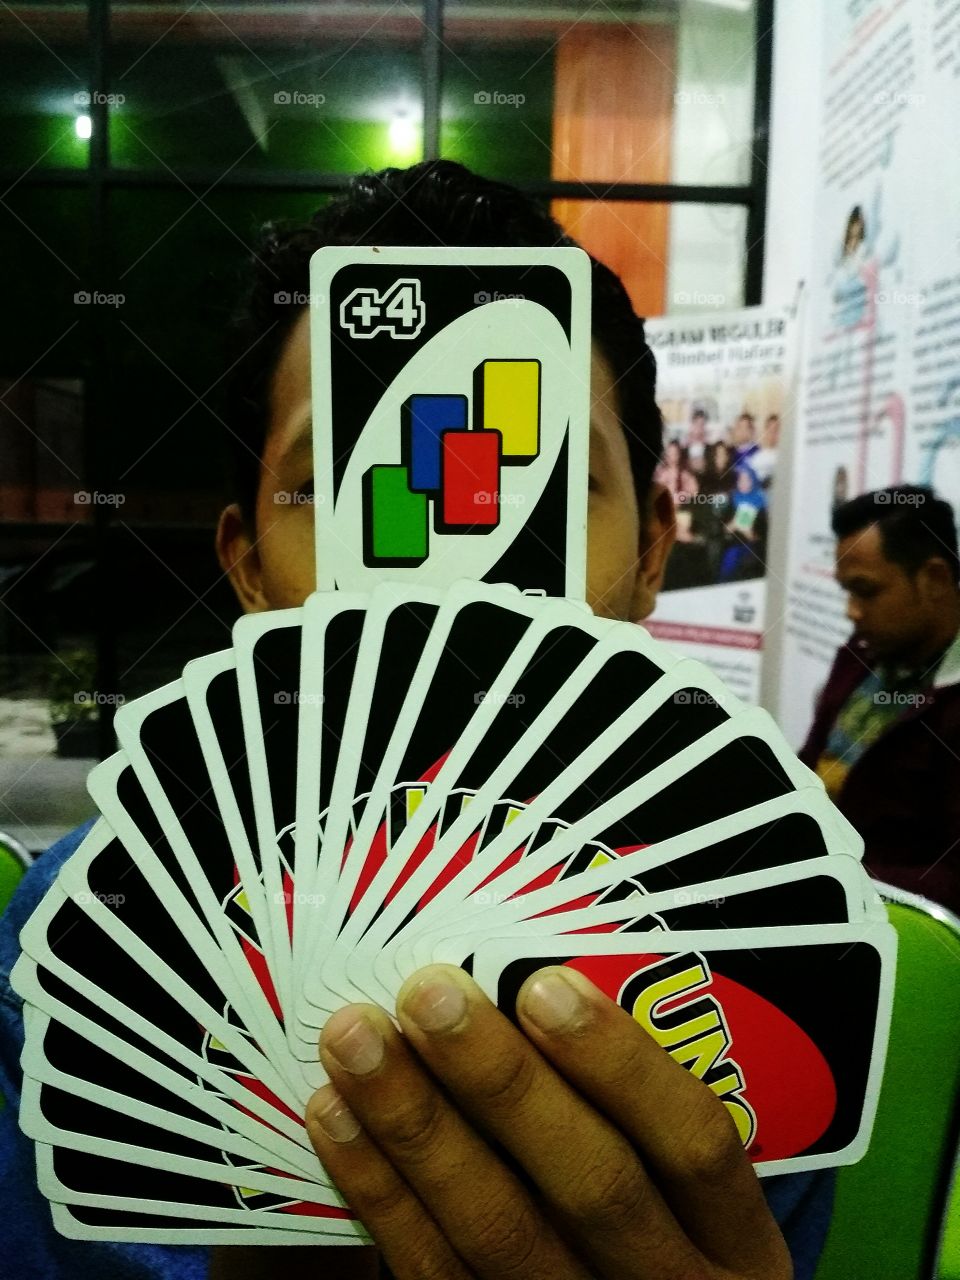 filling free time and looking busy with playing uno card